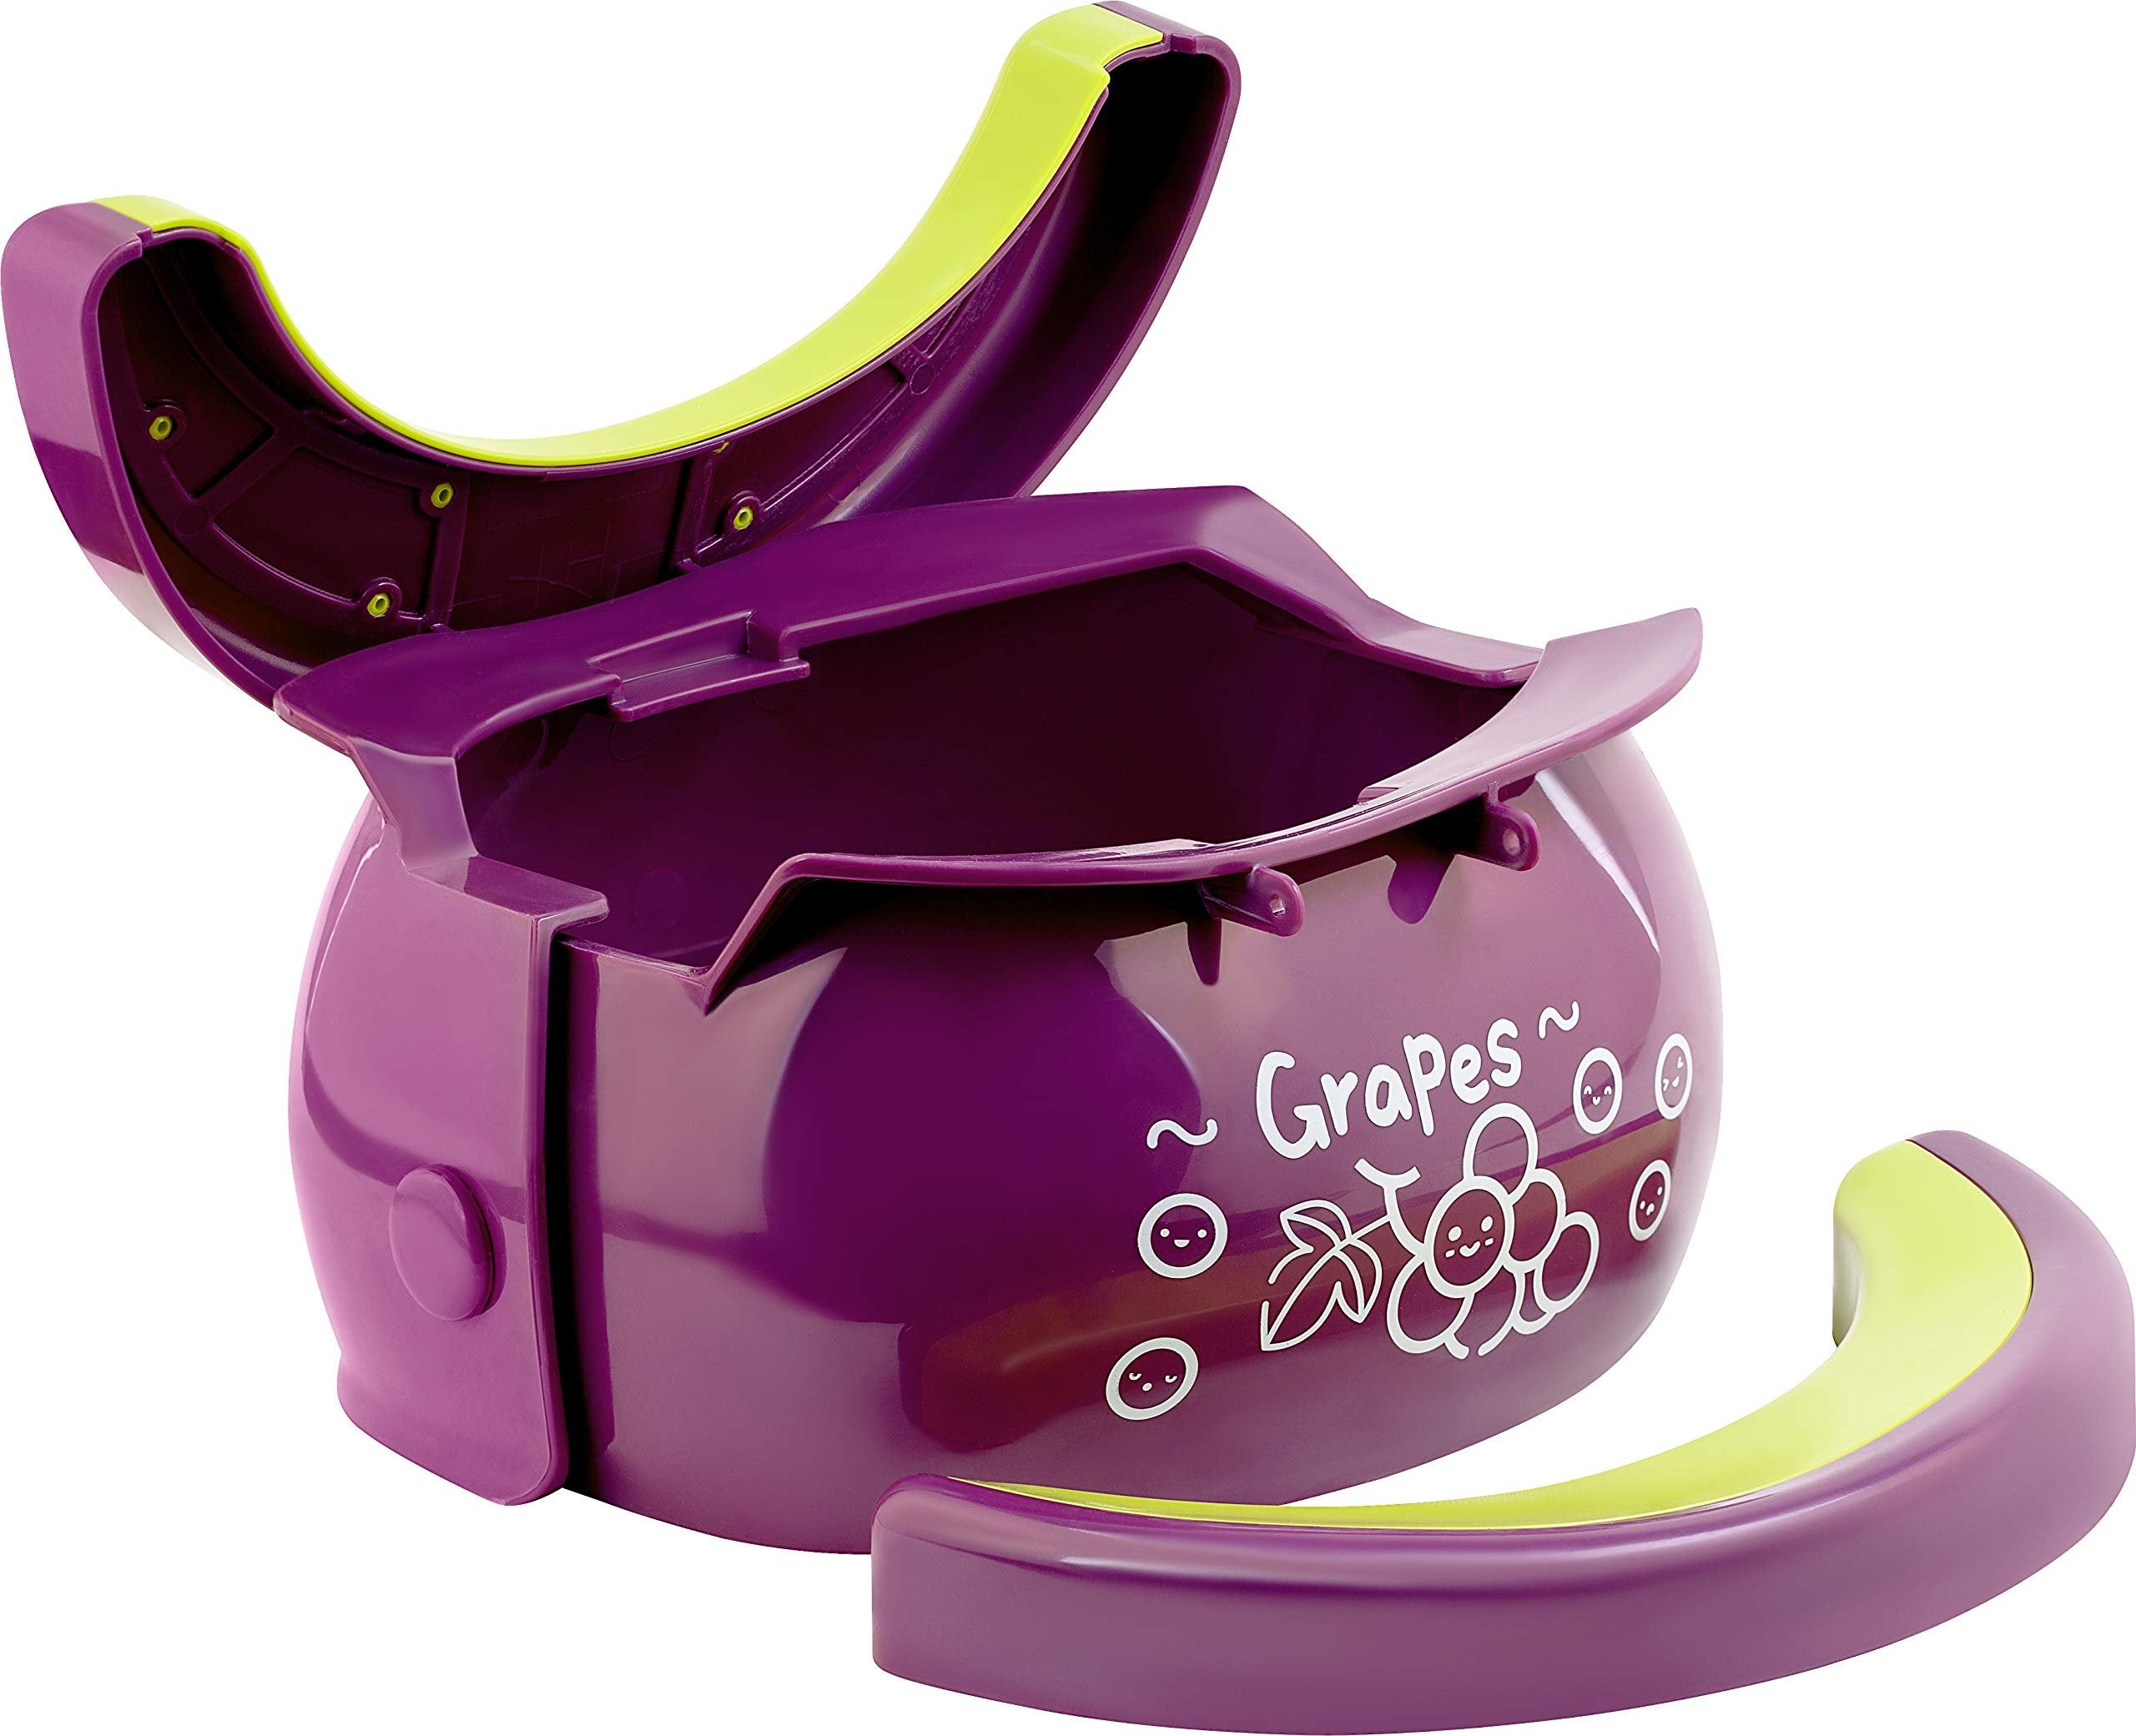 New Tinukim 2-in-1 Portable Potty Trainer, Grape Color, 102 Piece Set for Baby, Toddlers & Kids - with Splash Guard & Potty Liners - Free Shipping & Returns